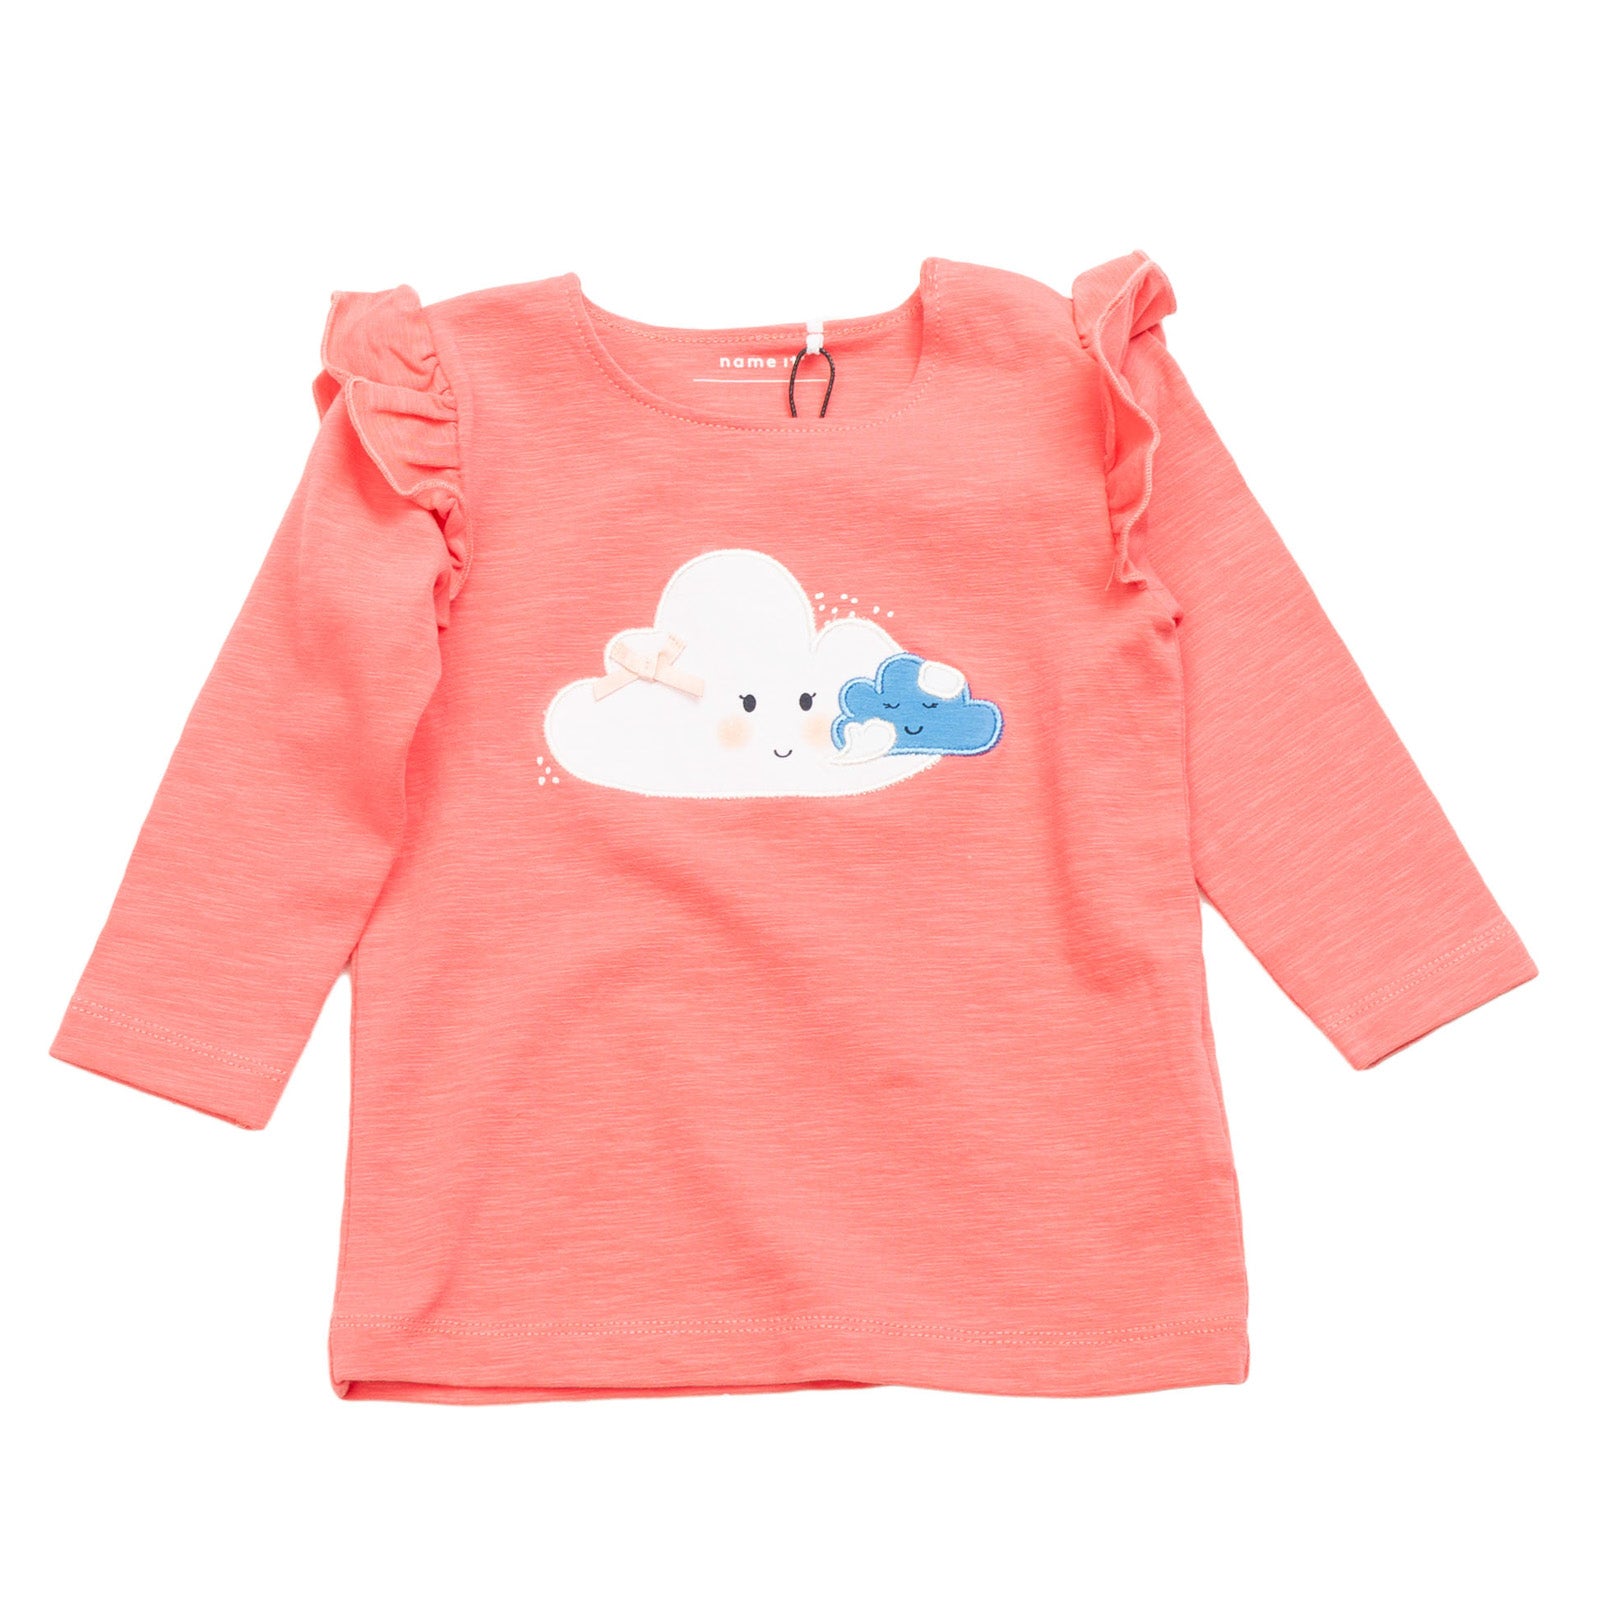 NAME IT T-Shirt Top Size 2-4M / 62CM Clouds Patches Ruffle Trim Raw Edges gallery main photo